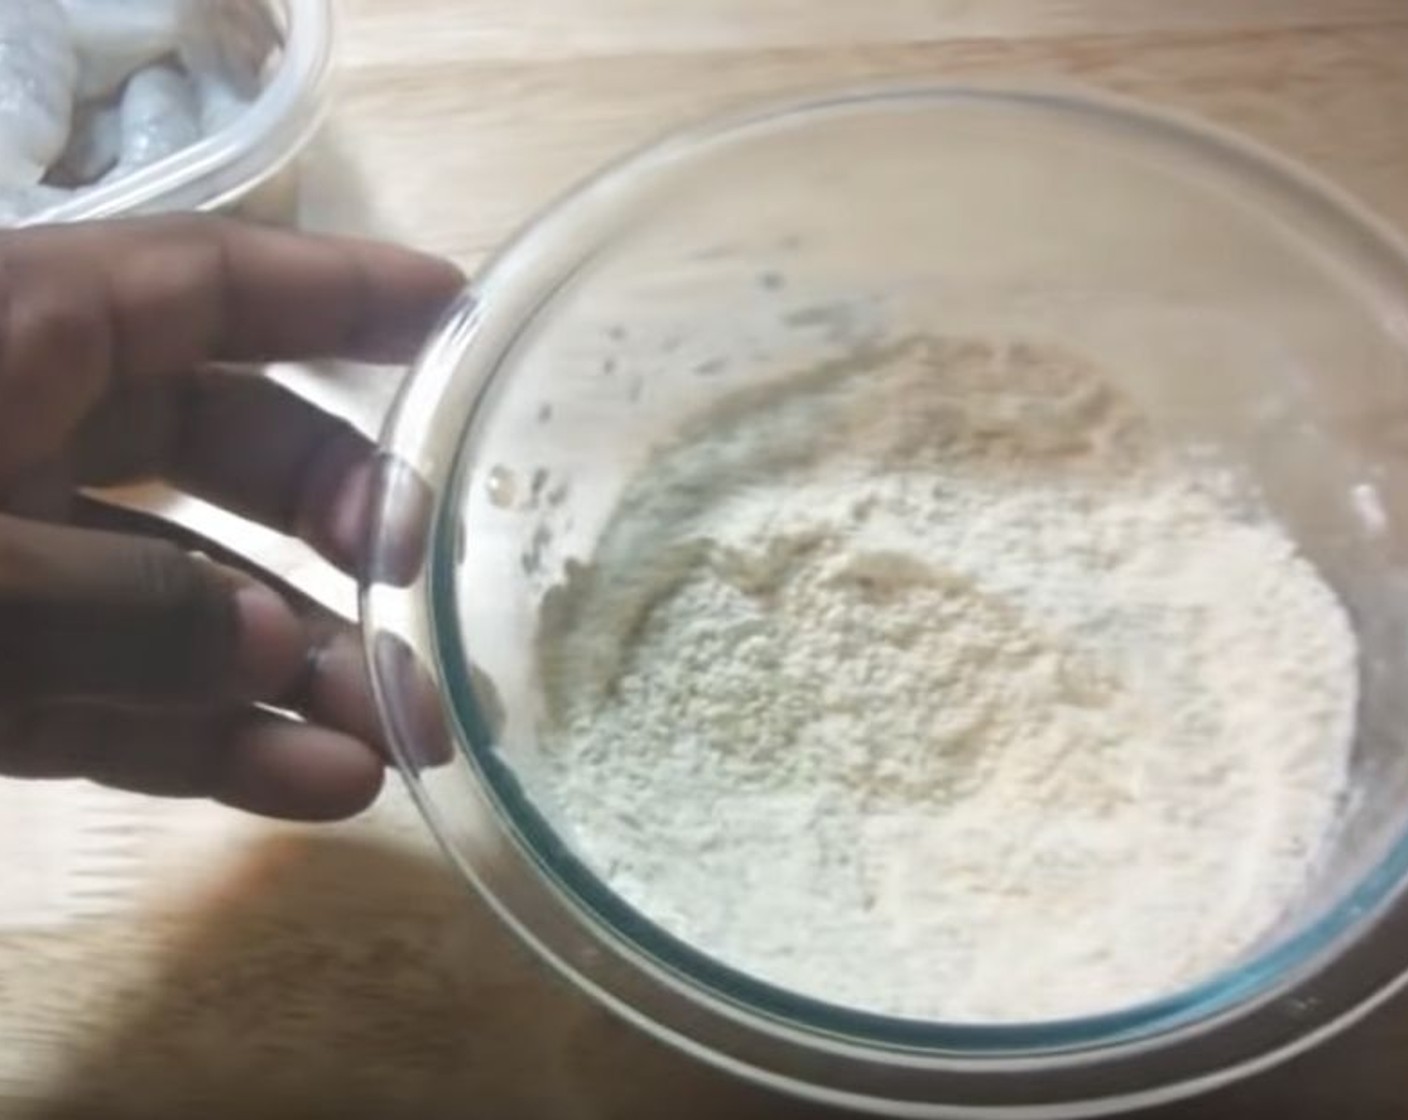 step 1 Into a mixing bowl, add All-Purpose Flour (2/3 cup), Cornmeal (1/3 cup), Salt (1/2 tsp), and Ground Black Pepper (1/2 tsp). Stir to combine.